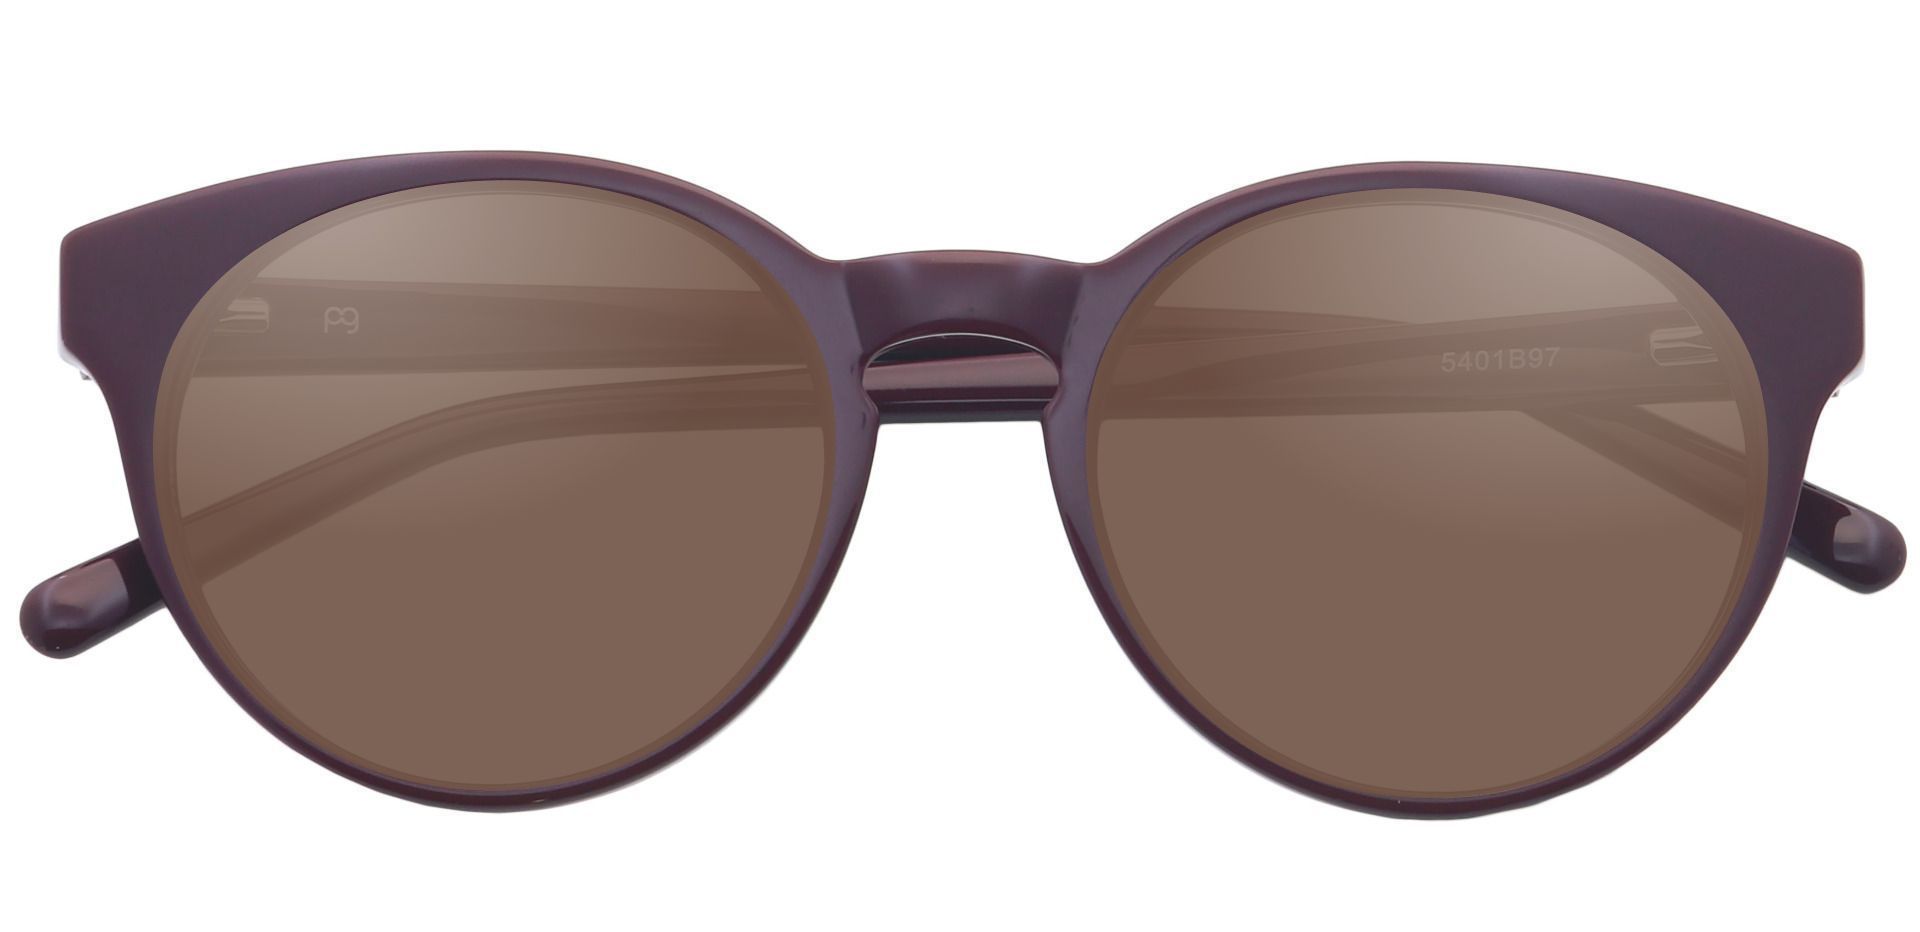 Spright Round Non-Rx Sunglasses -  Brown Frame With Brown Lenses